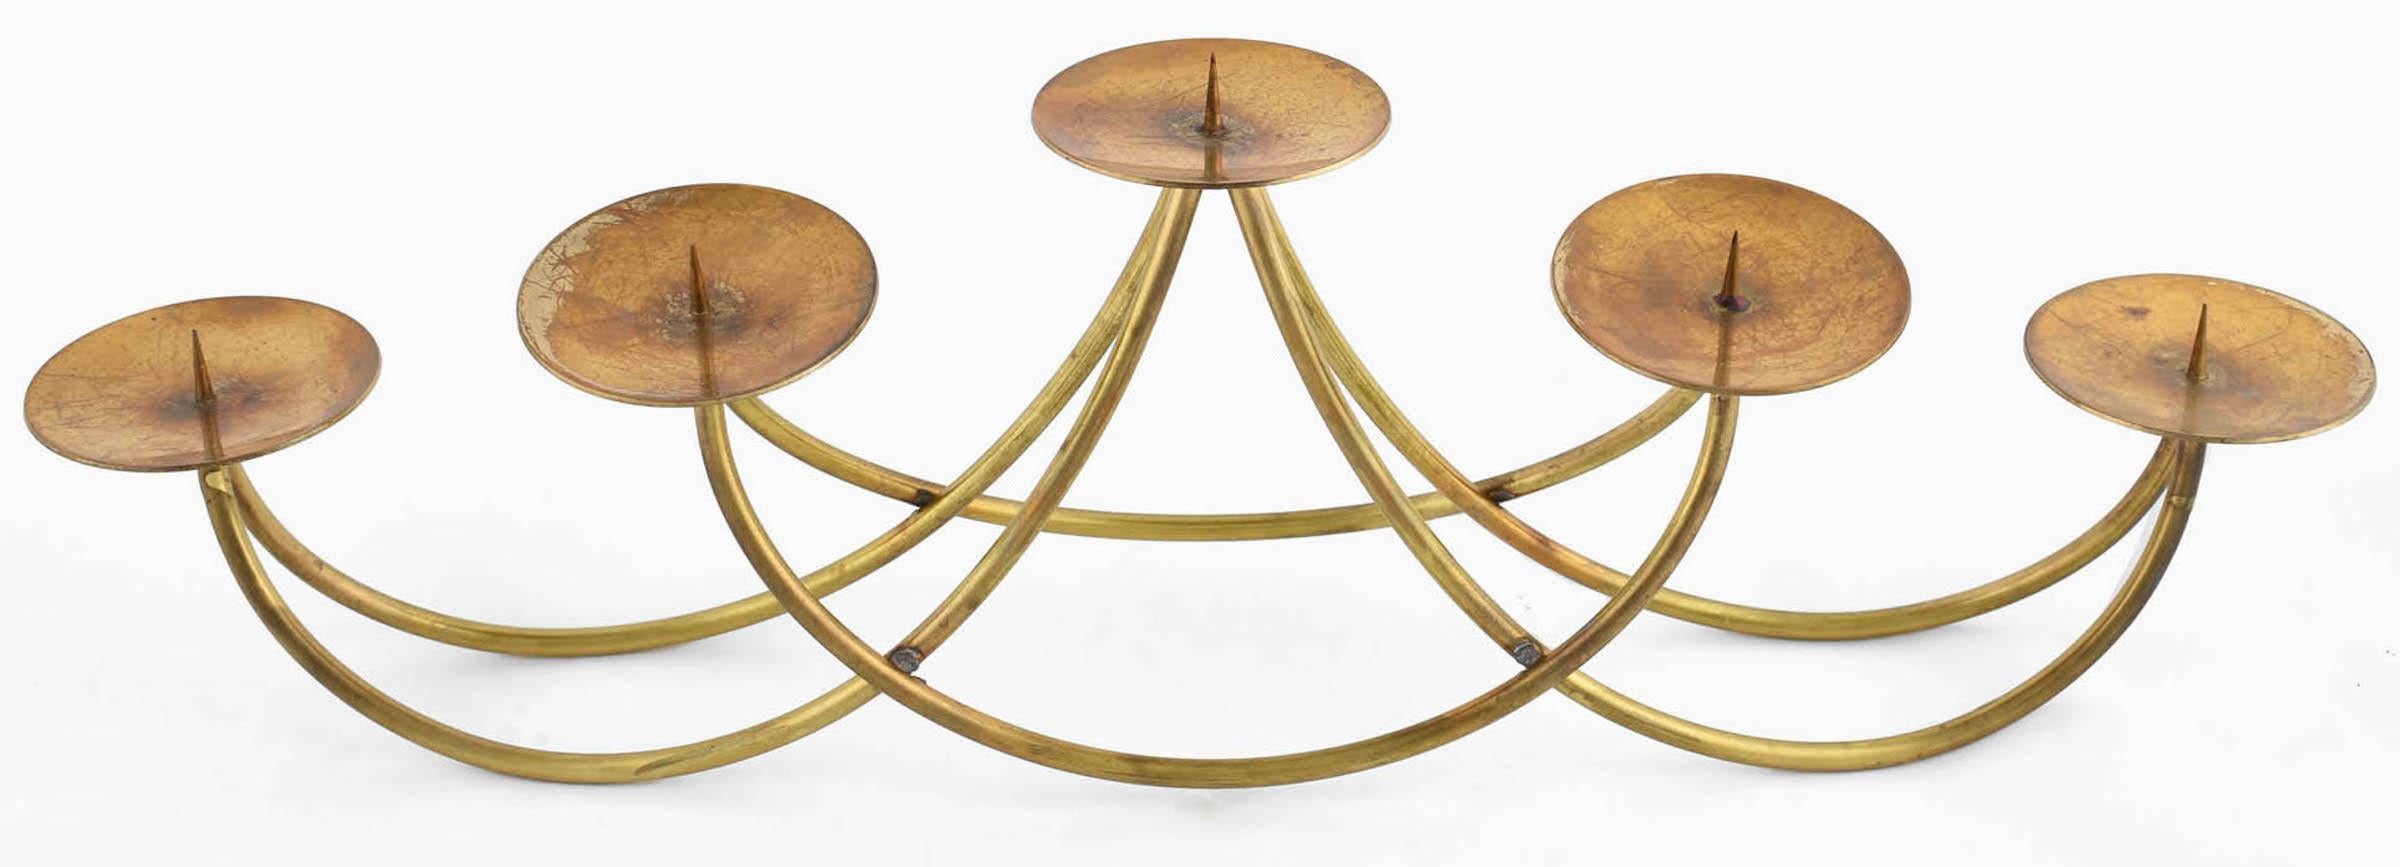 Mid-20th Century Vintage Brass Candletree by Harald Buchrucker, Germany, 1950s